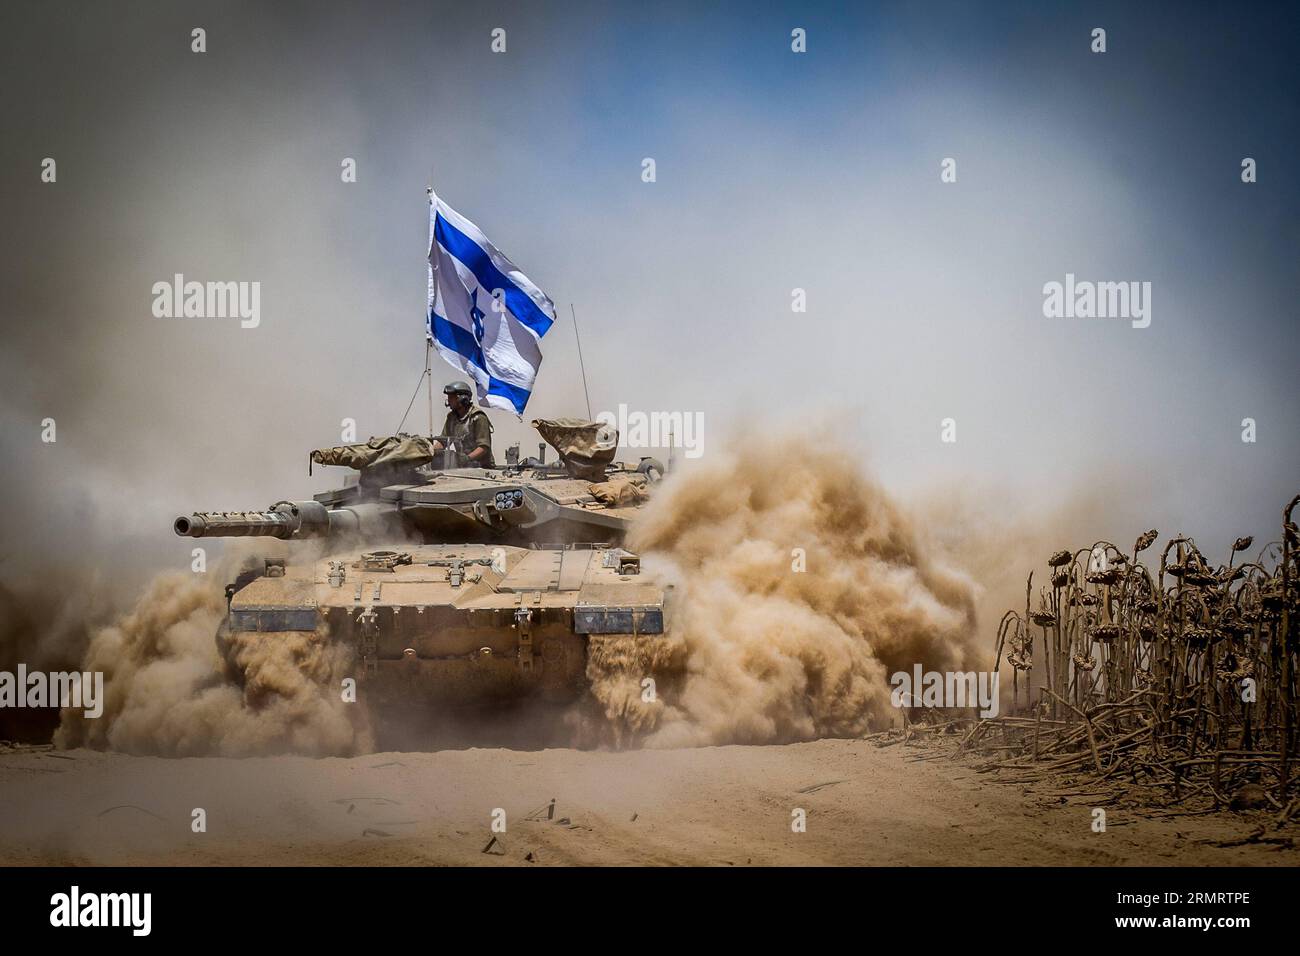 An Israeli Merkava tank pulls back from the Gaza Strip to an army deployment area in southern Israel bordering the Gaza Strip, on Aug. 3, 2014. The Israeli military has announced that it will hold fire for seven hours Monday in parts of the Gaza Strip to facilitate the entry of humanitarian aid and for displaced Palestinians to return to their homes. ) (zhf) ISRAEL-7-HOUR HUMANITARIAN TRUCE-ANNOUNCEMENT JINI PUBLICATIONxNOTxINxCHN   to Israeli Merkava Tank pull Back from The Gaza Strip to to Army  Area in Southern Israel borde ring The Gaza Strip ON Aug 3 2014 The Israeli Military has announce Stock Photo